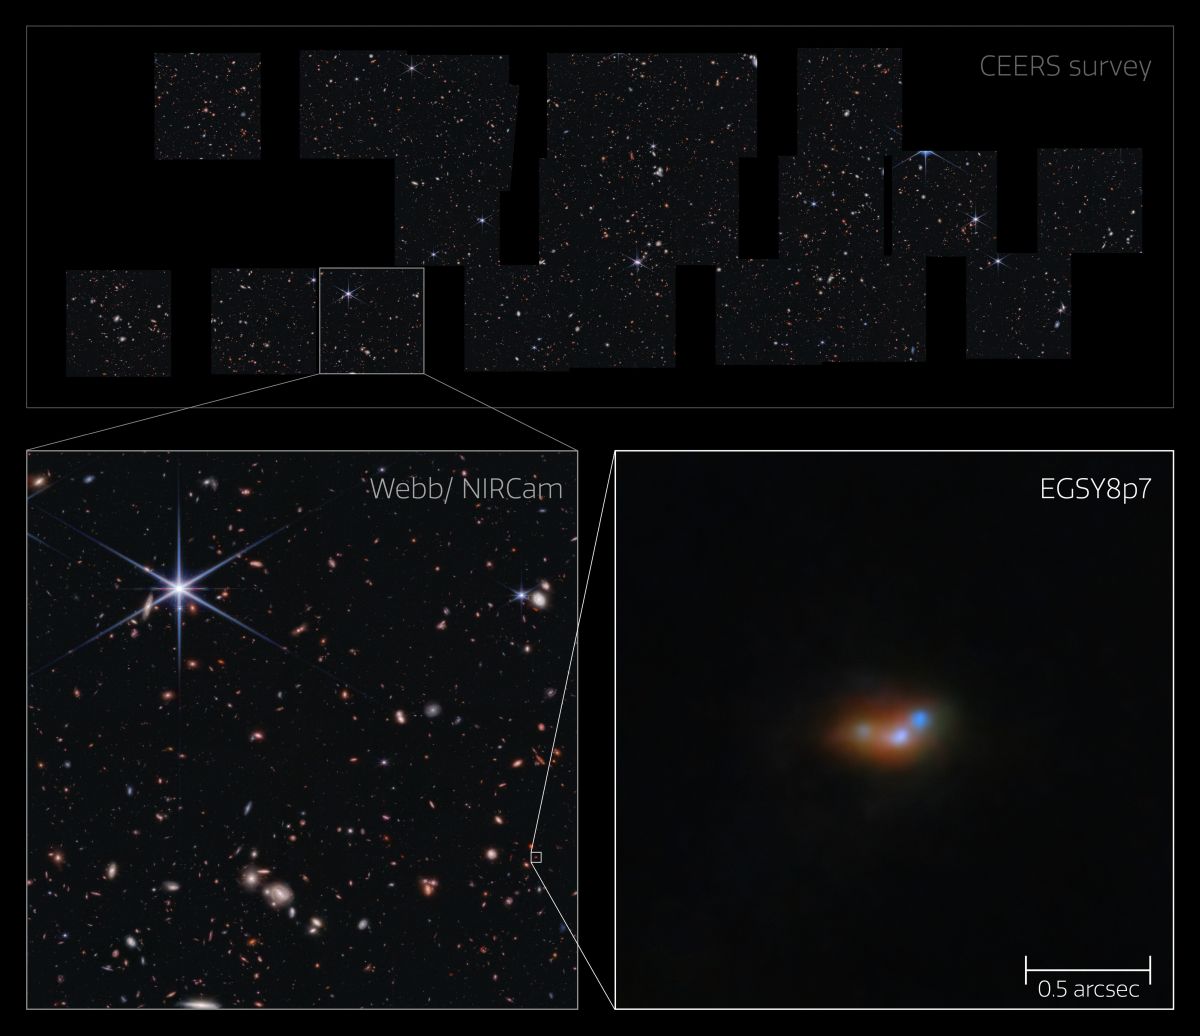 This image shows the galaxy EGSY8p7, a bright galaxy in the early Universe where light emission is seen, among other things, from excited hydrogen atoms: Lyman-alpha emission.  Scientists are looking at this and other young galaxies to understand the role dark matter plays in early cosmic history.